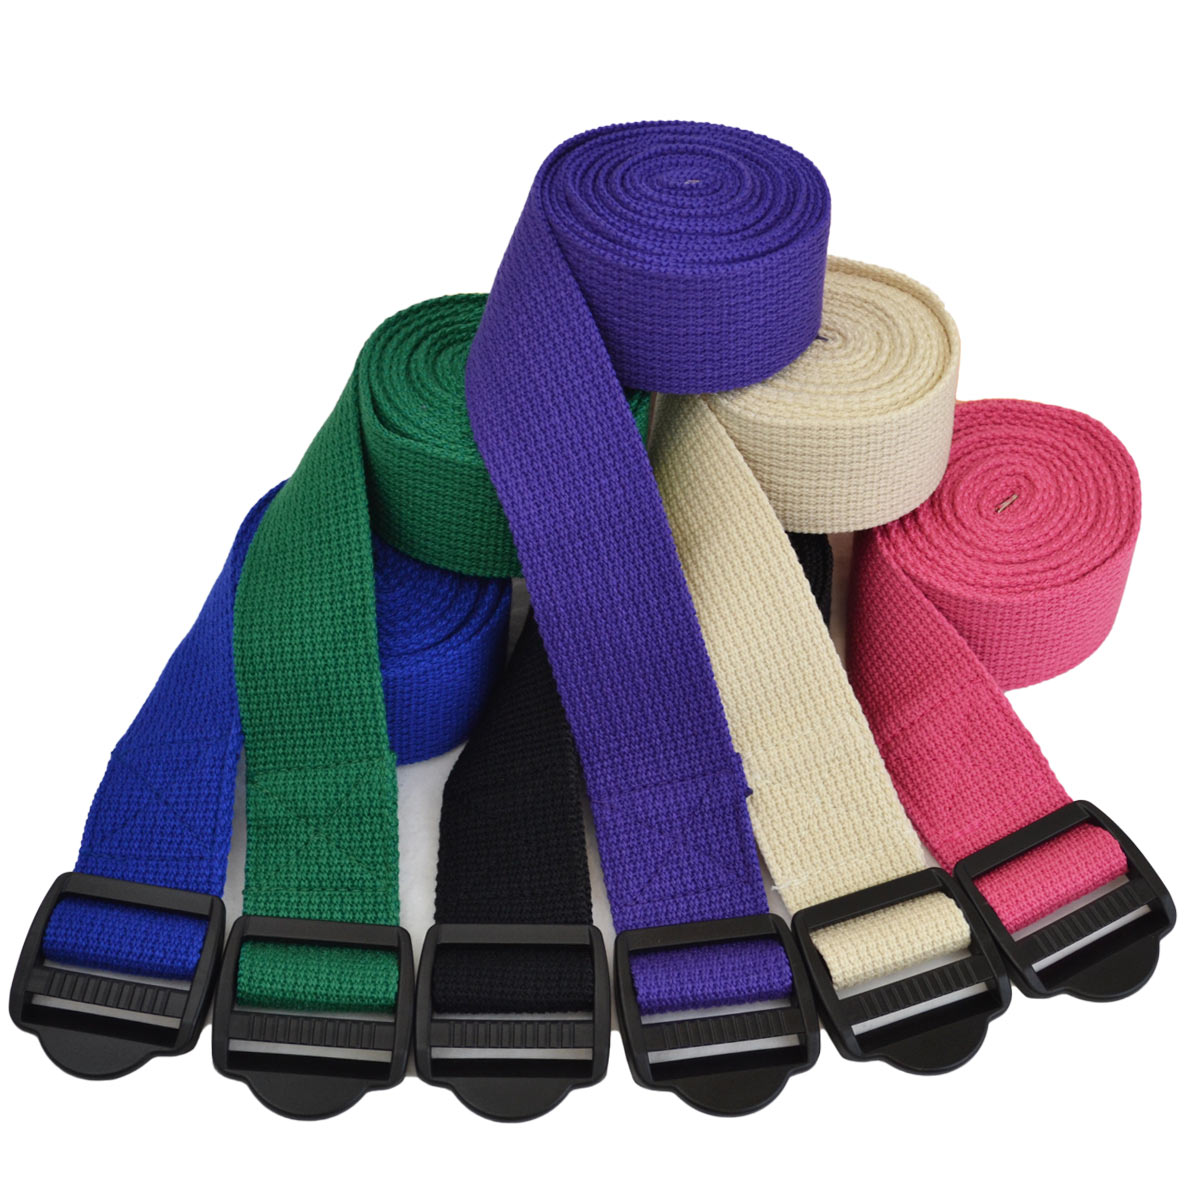 8 Different Types of Yoga Straps